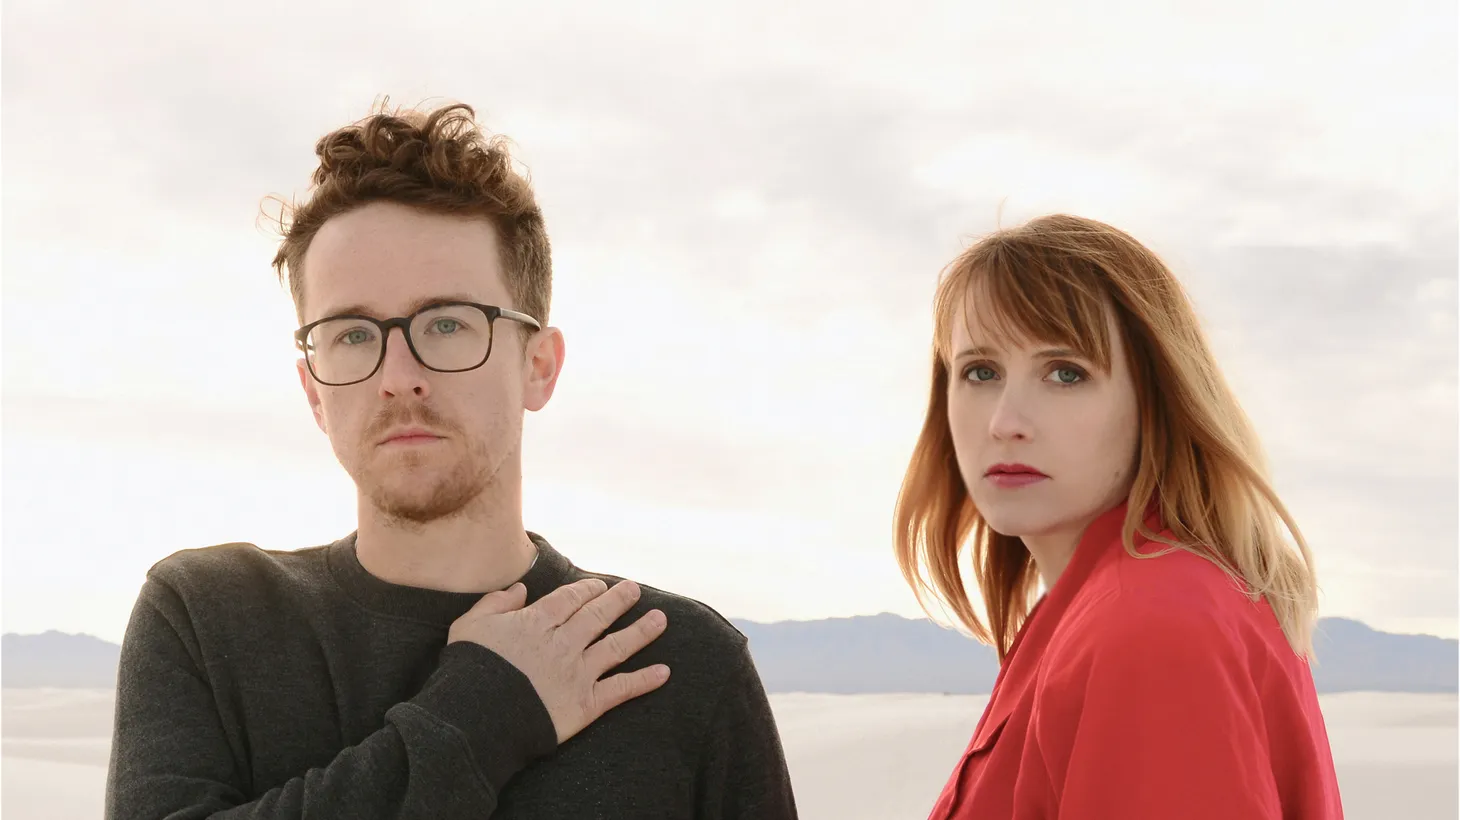 Wye Oak is the perfect combo of indie rock and folk, and their latest release is their best yet.